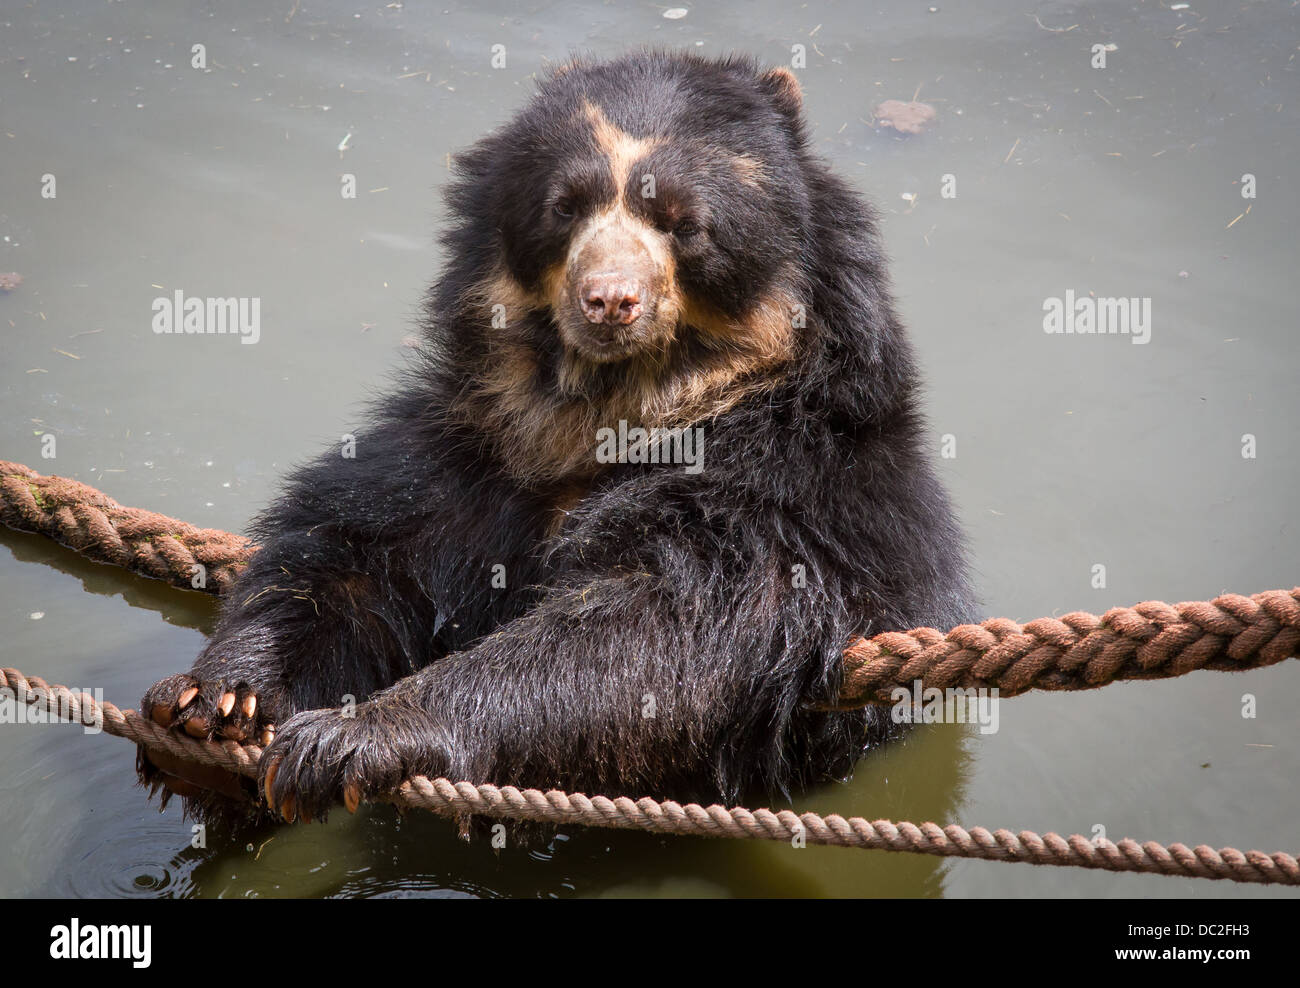 Andean Bear or Spectacled Bear bathing at South Lakes Wild Animal Park Stock Photo